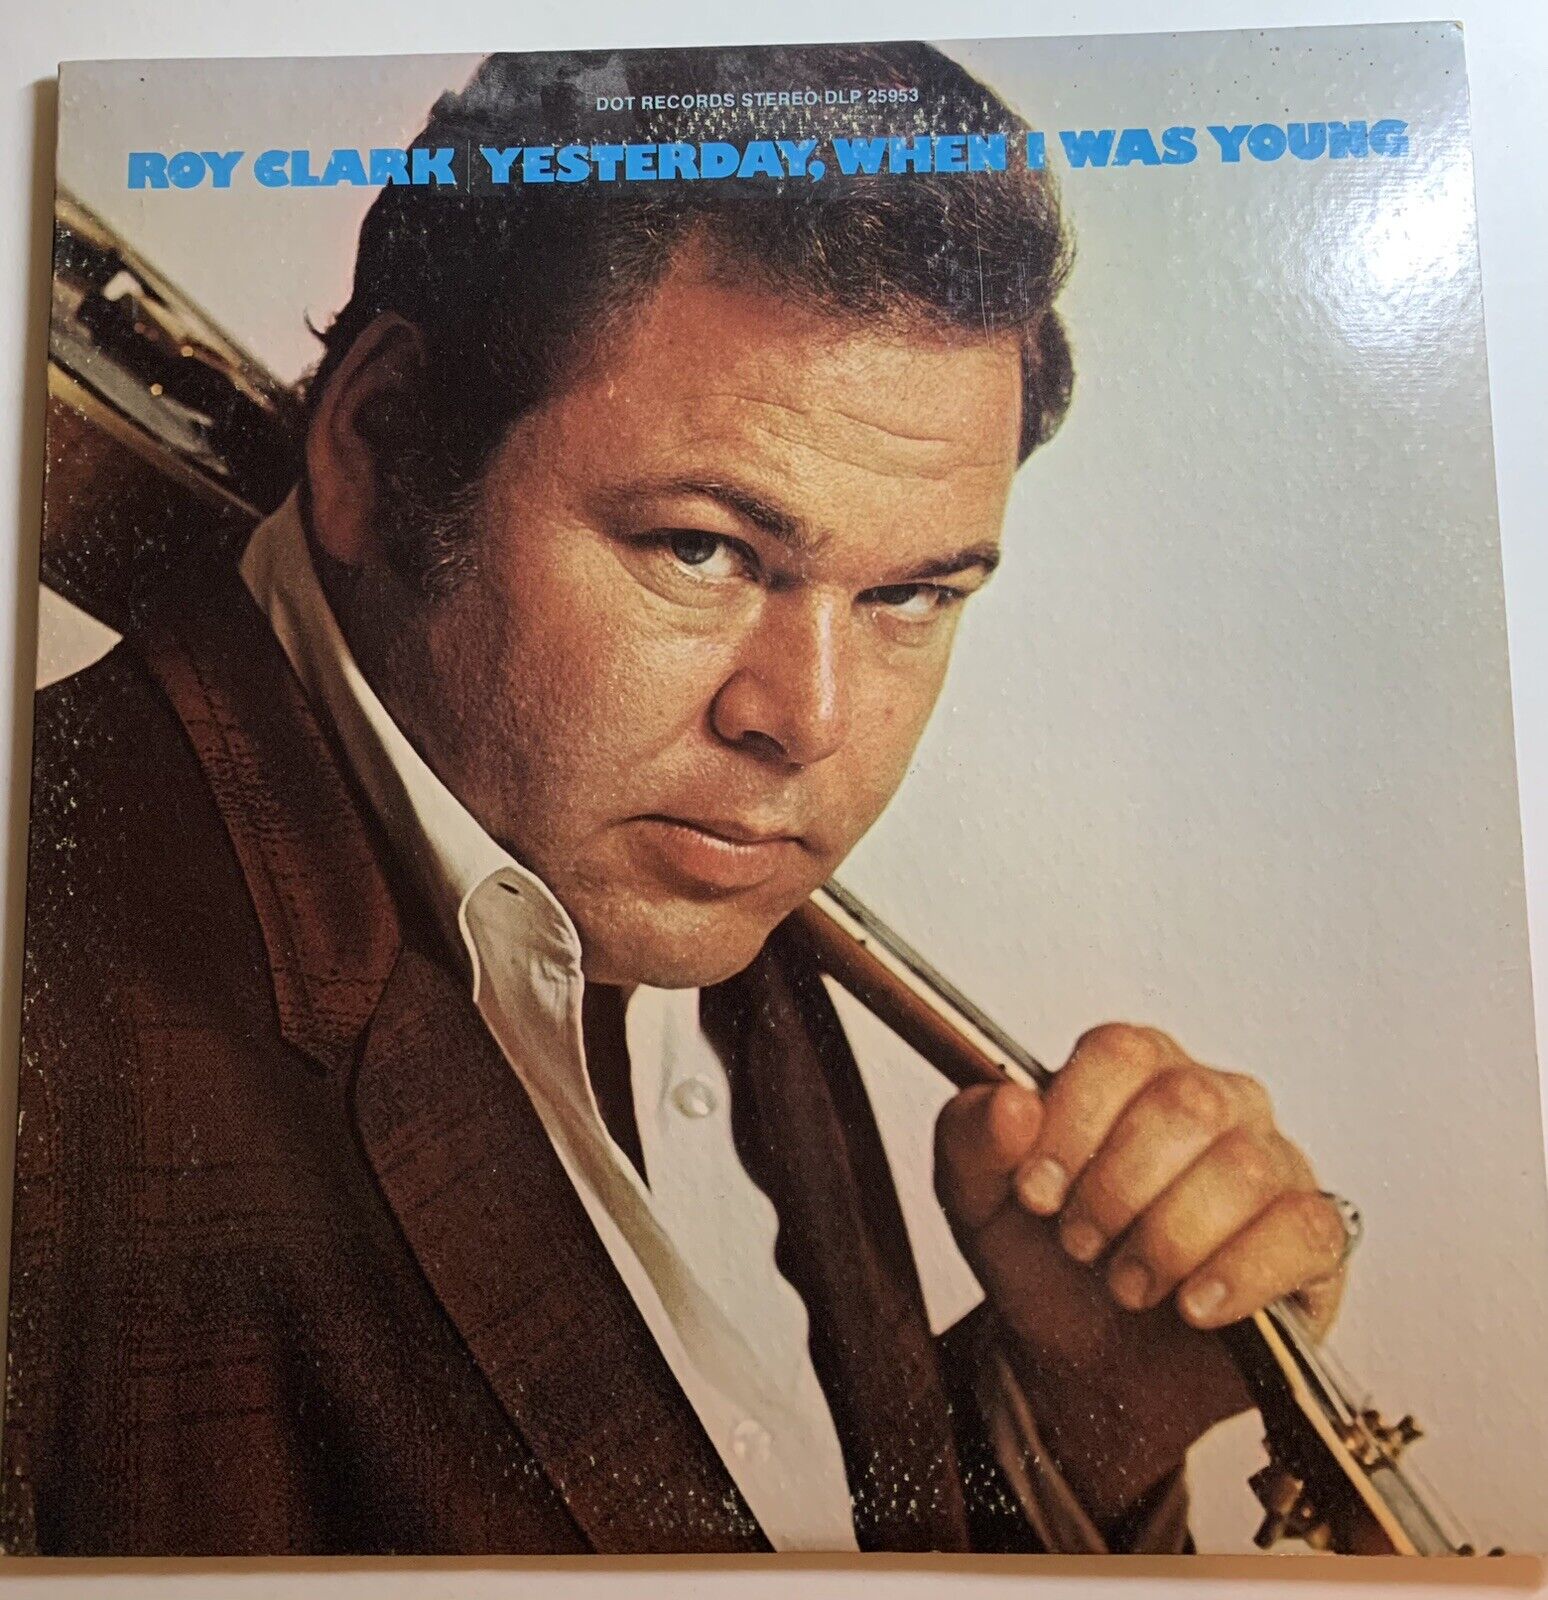 Roy Clark Yesterday When I Was Young Vinyl 33 RPM